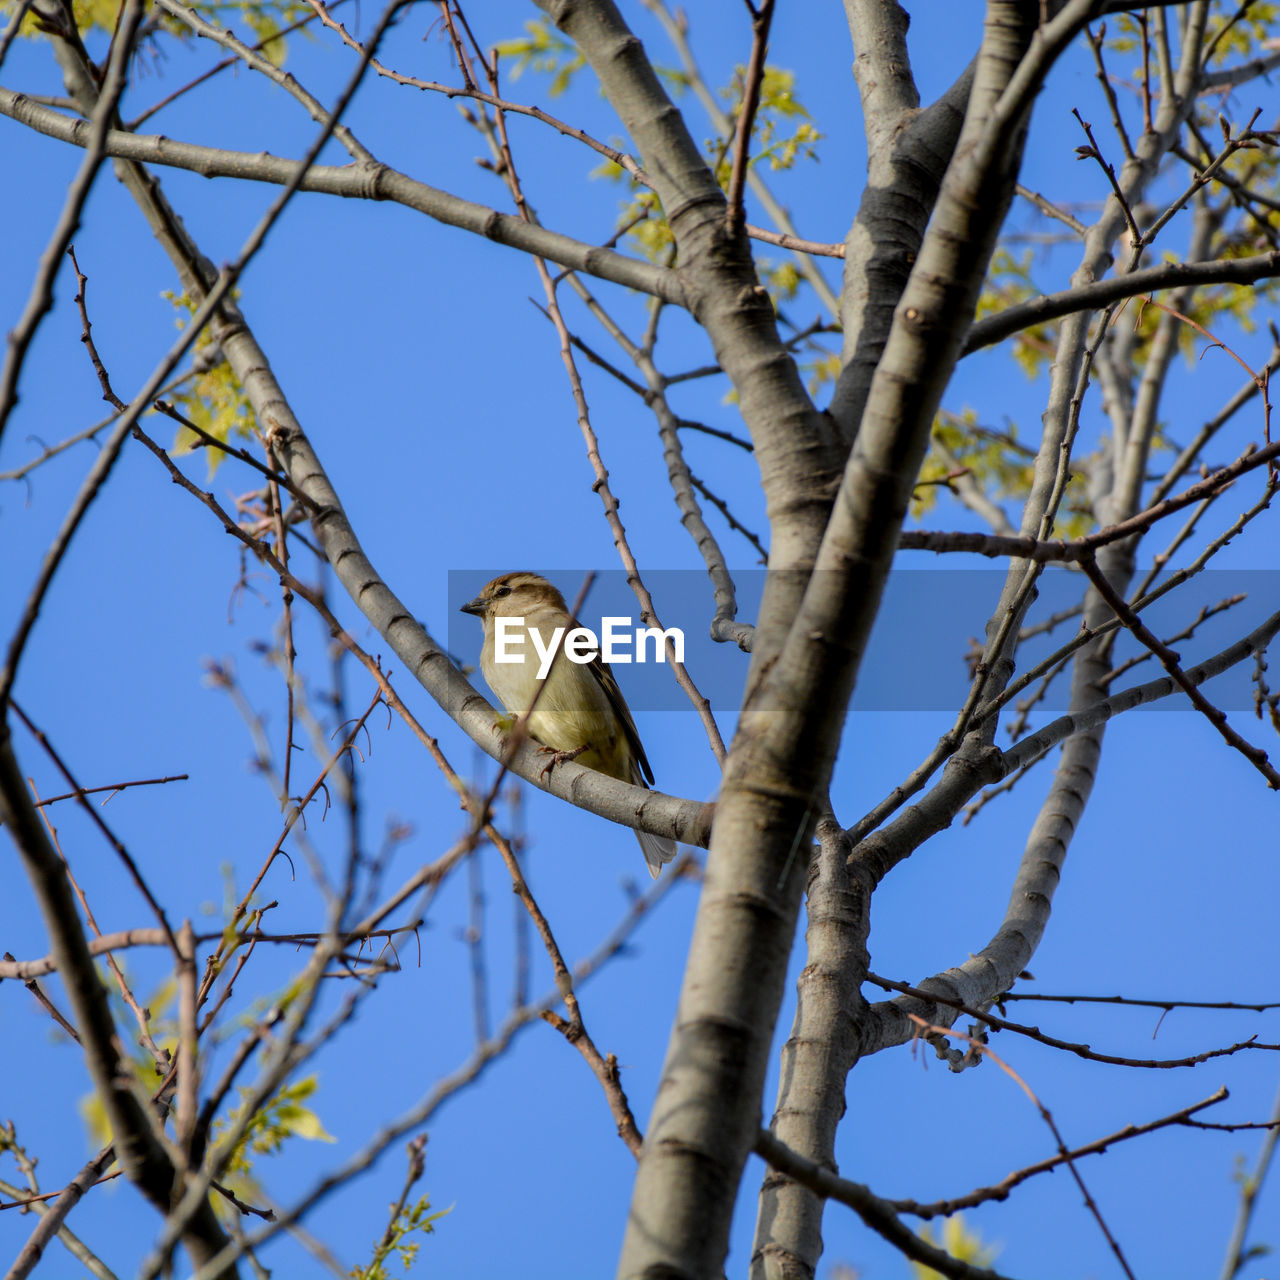 tree, branch, plant, sky, low angle view, bird, nature, blue, no people, clear sky, animal, animal themes, perching, animal wildlife, wildlife, day, spring, bare tree, twig, flower, outdoors, one animal, leaf